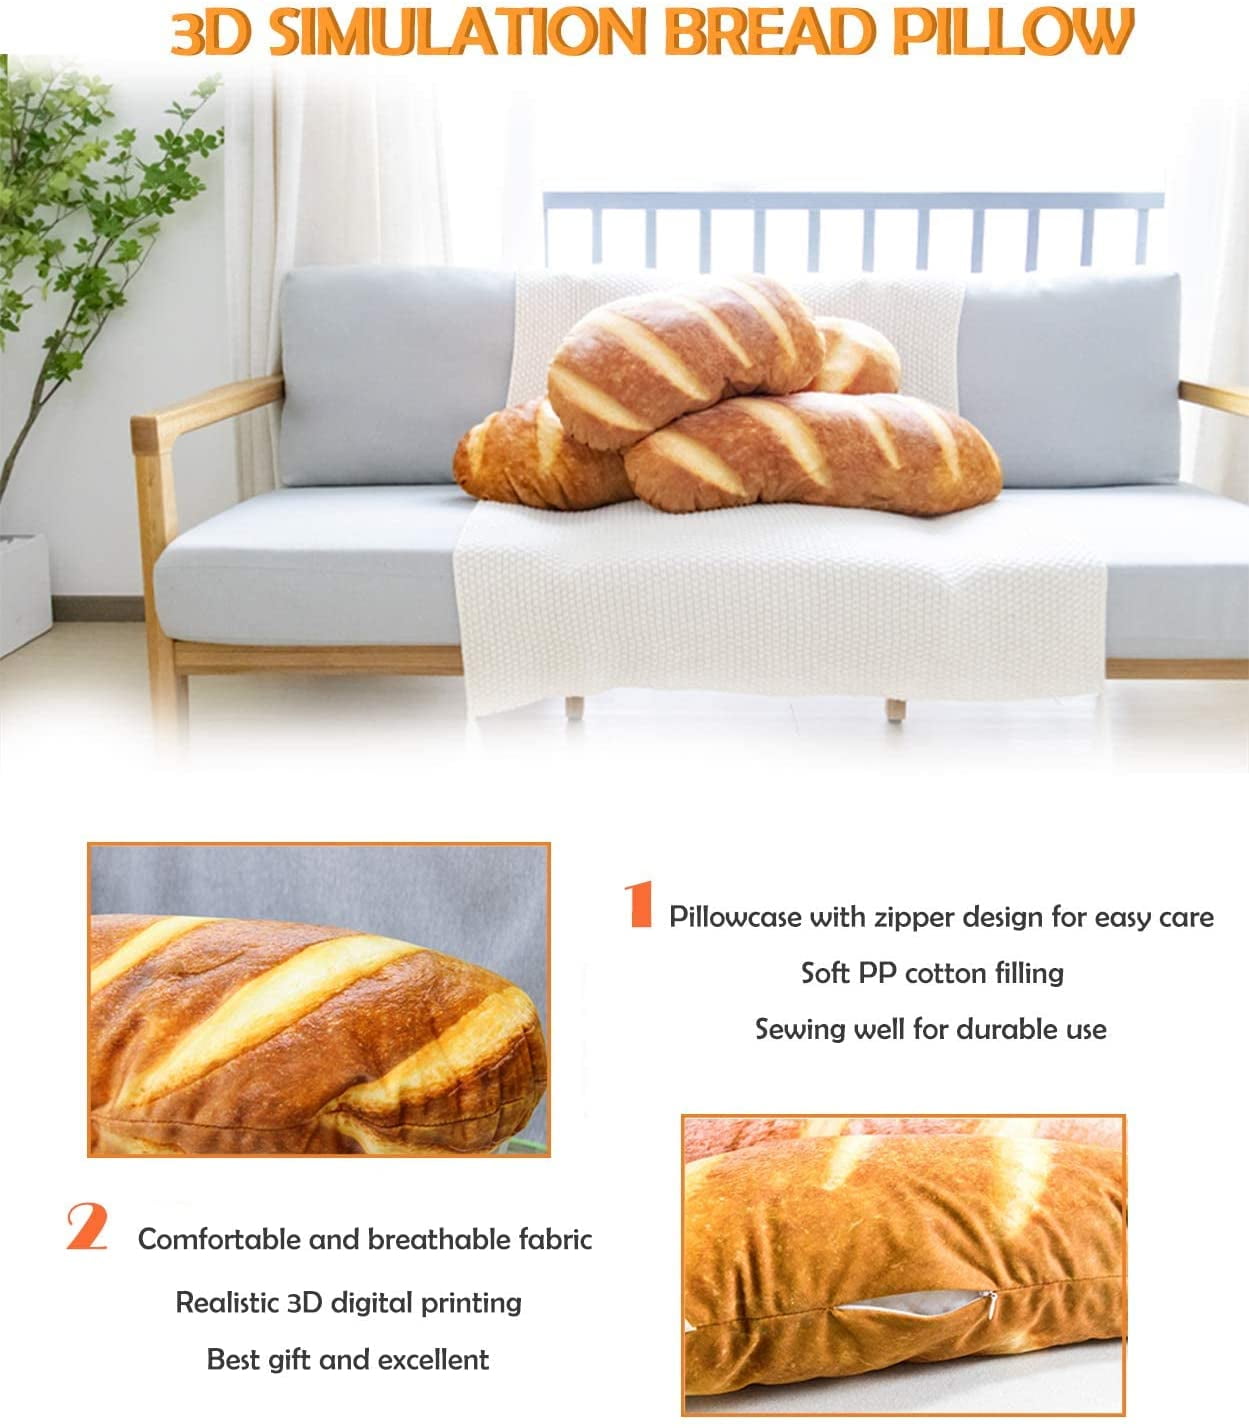 Levenkeness 3D Simulation Bread Shape Plush Pillow,Soft Butter Toast Bread Food Cushion Stuffed Toy for Home Decor 31.4